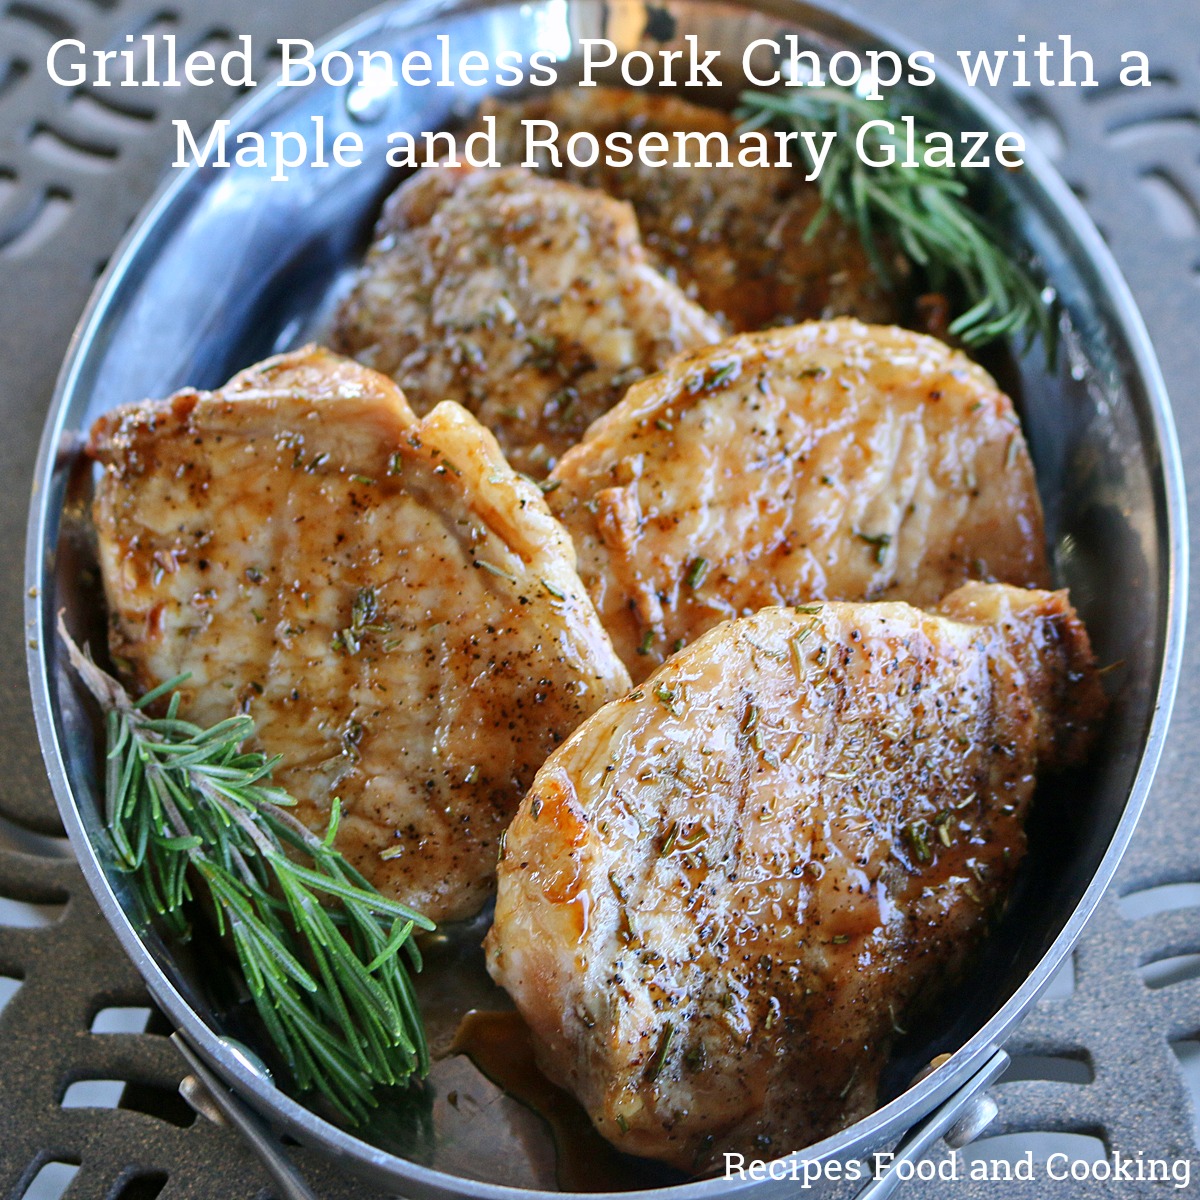 Grilled Boneless Pork Chops with a Maple and Rosemary Glaze